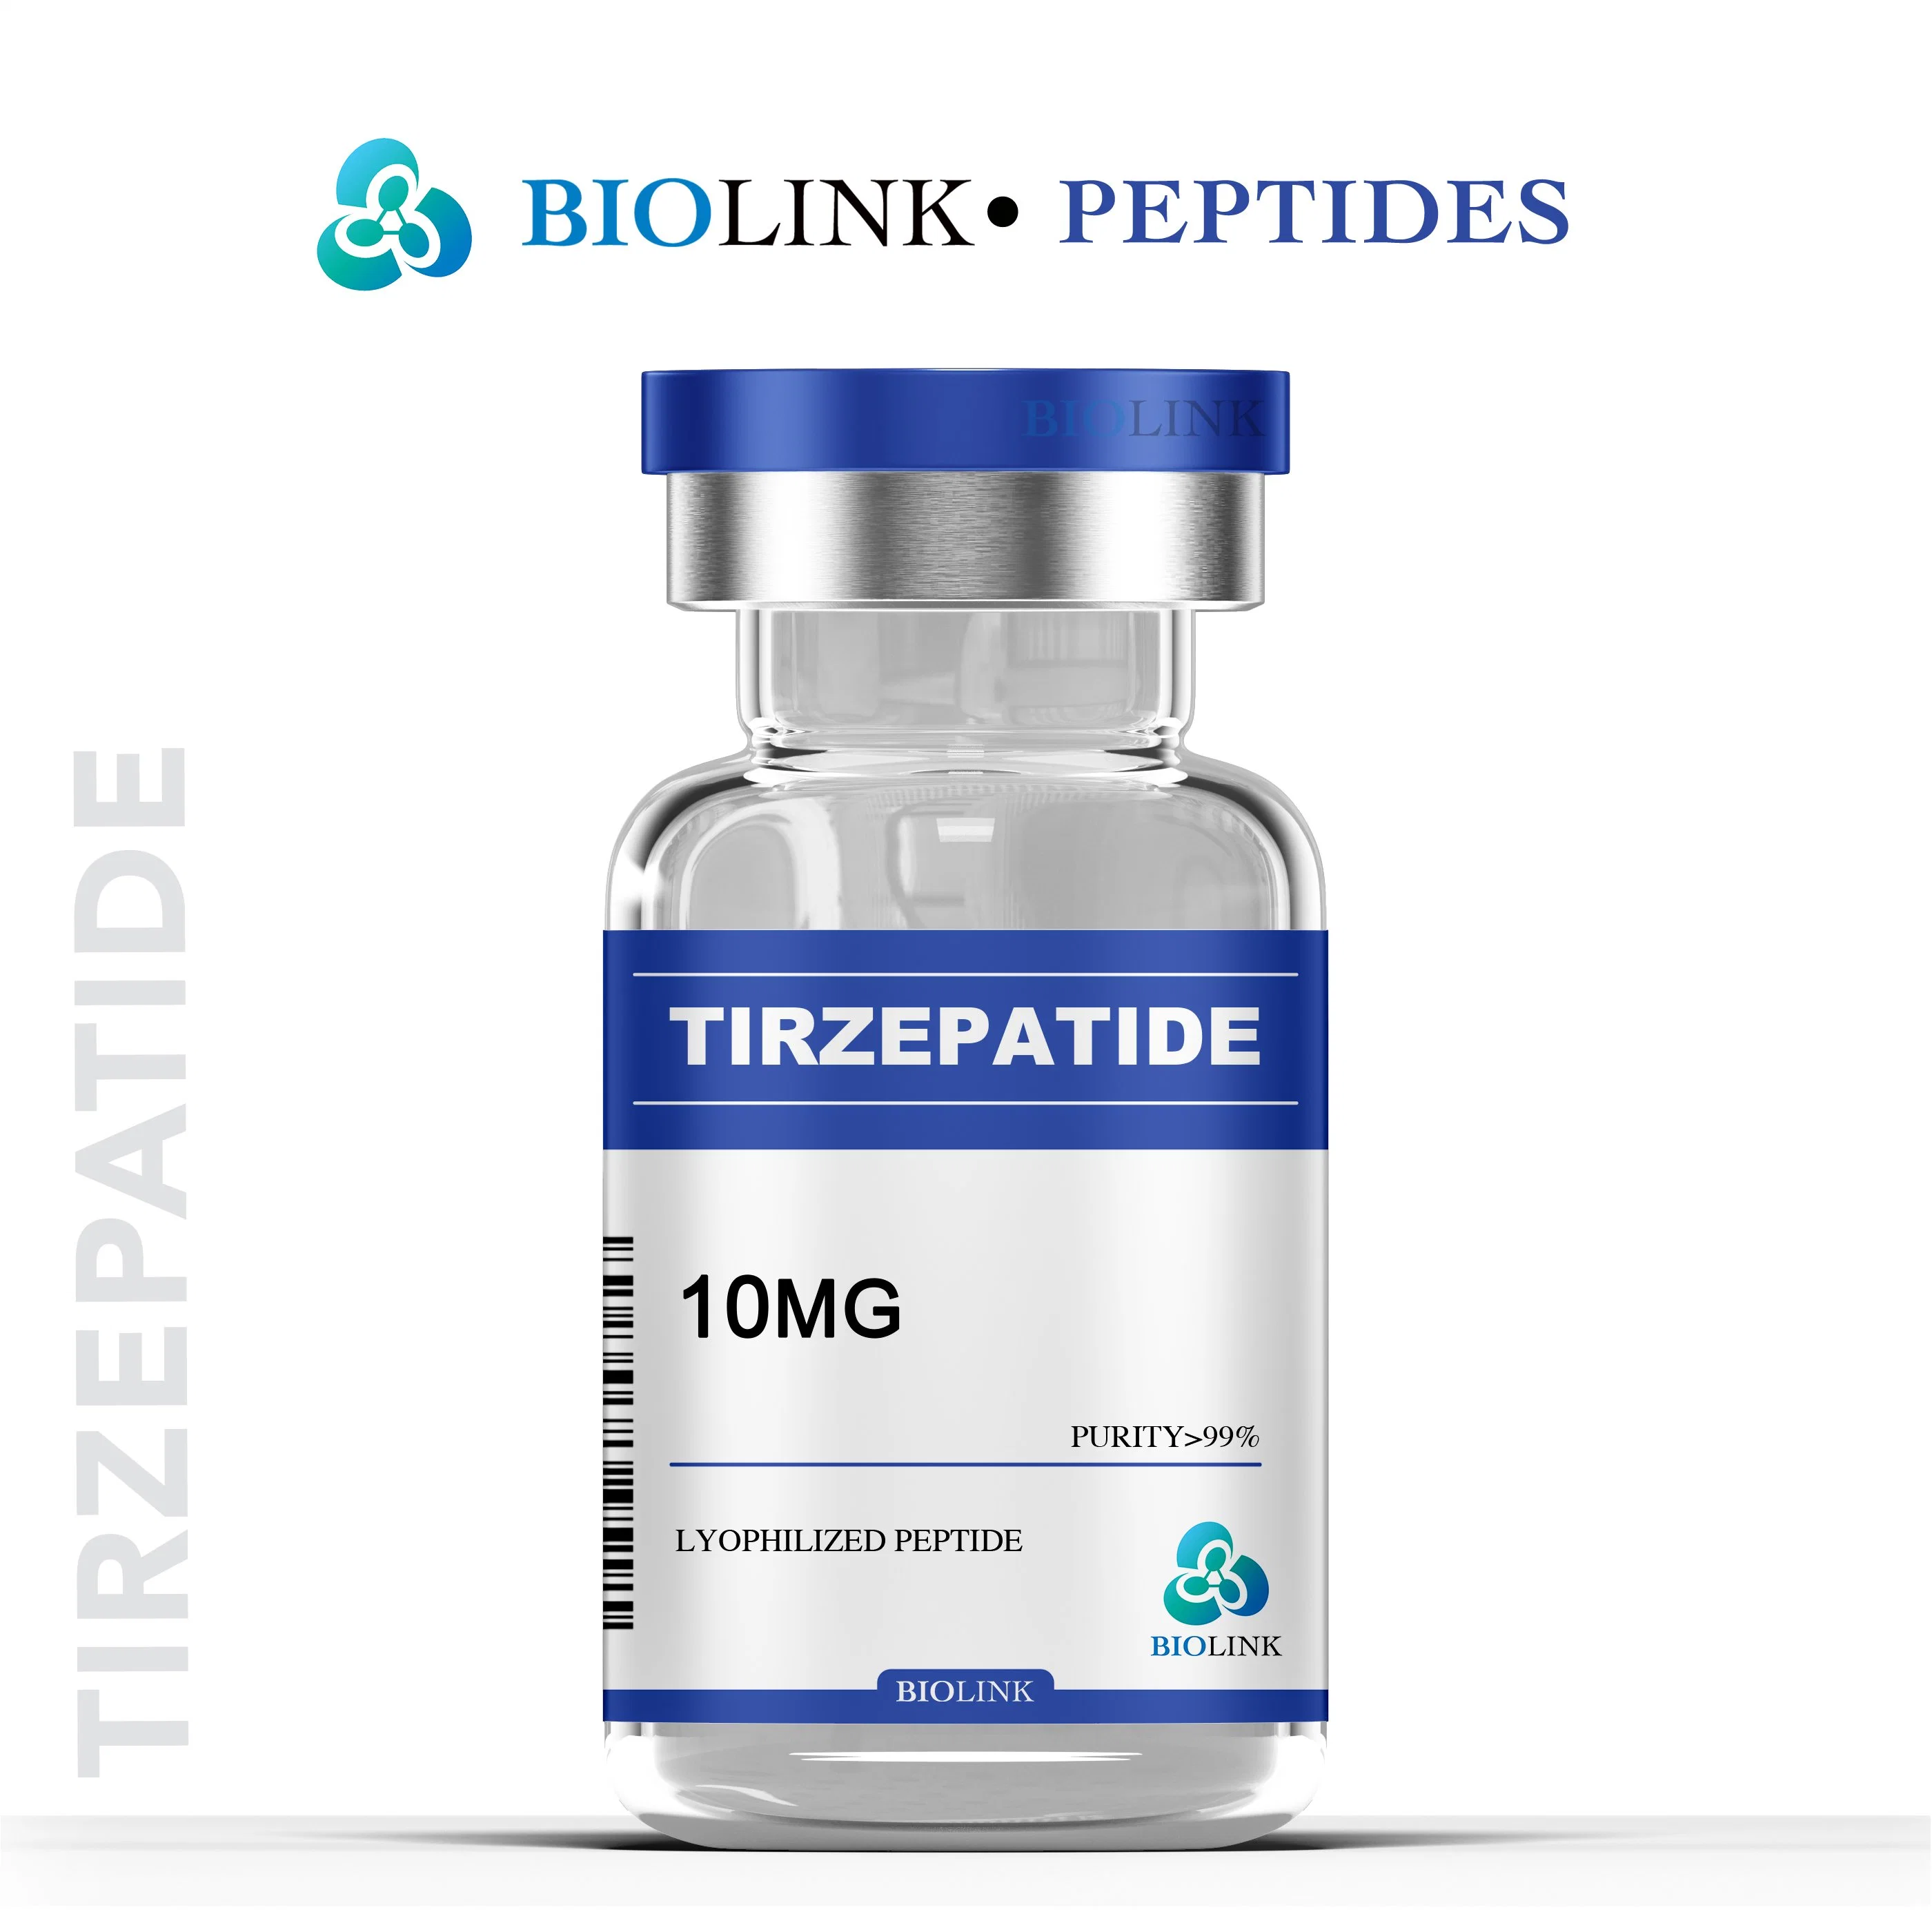 Tirzepatide 10mg 15mg Weight Loss Peptides Australia Free Sample Support CAS: 2023788-19-2